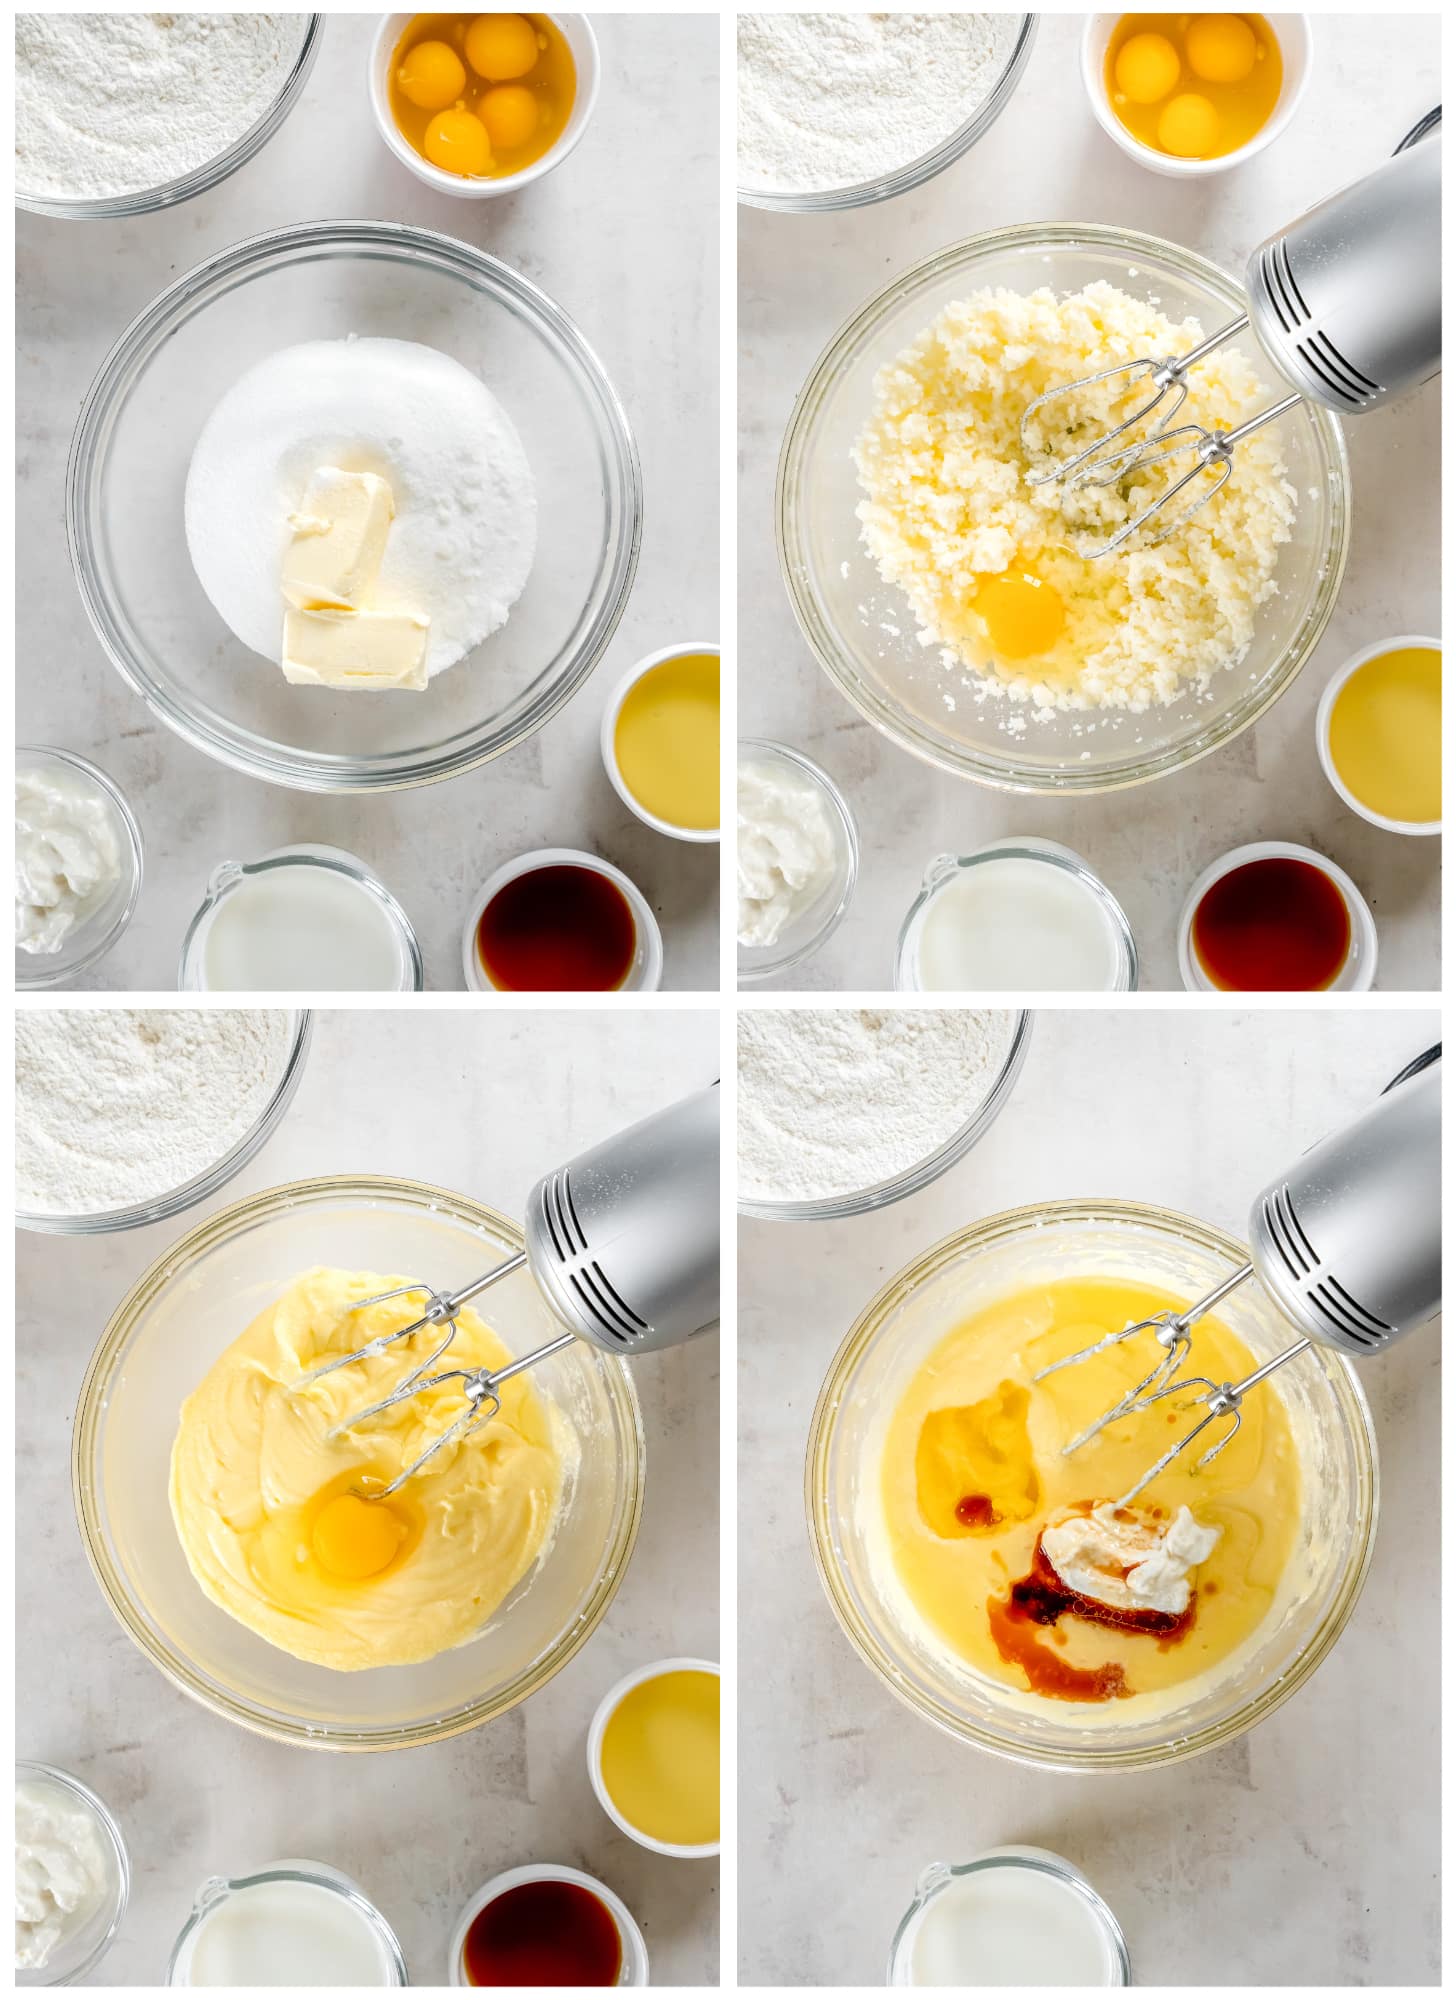 photo collage demonstrating how to make vanilla sheet cake batter in a mixing bowl with a hand mixer